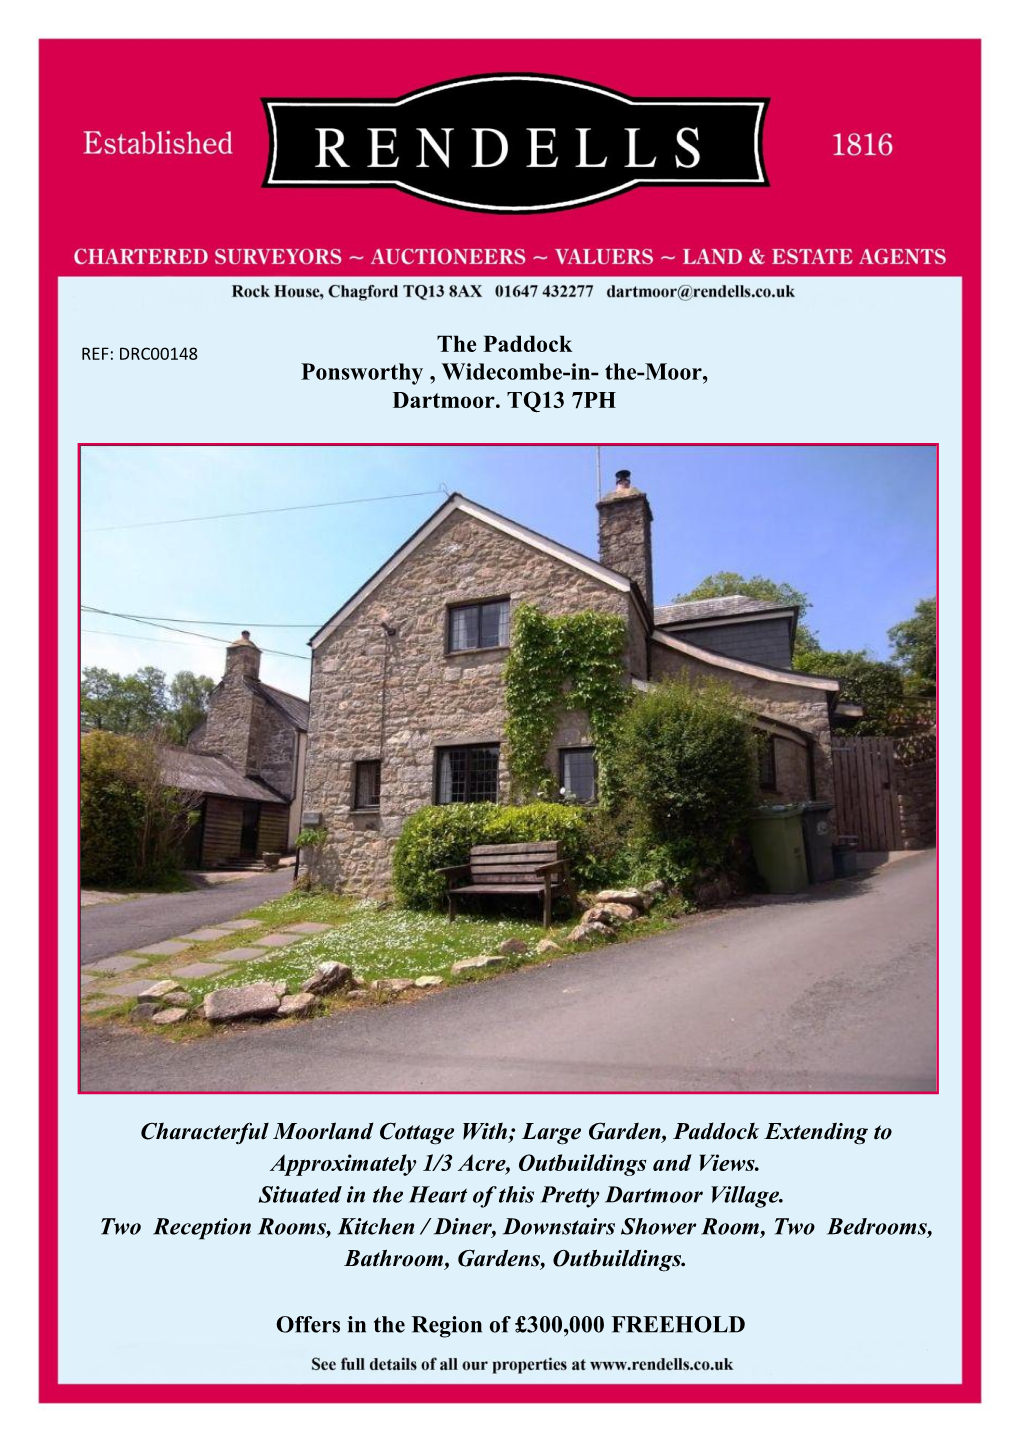 Characterful Moorland Cottage With; Large Garden, Paddock Extending to Approximately 1/3 Acre, Outbuildings and Views